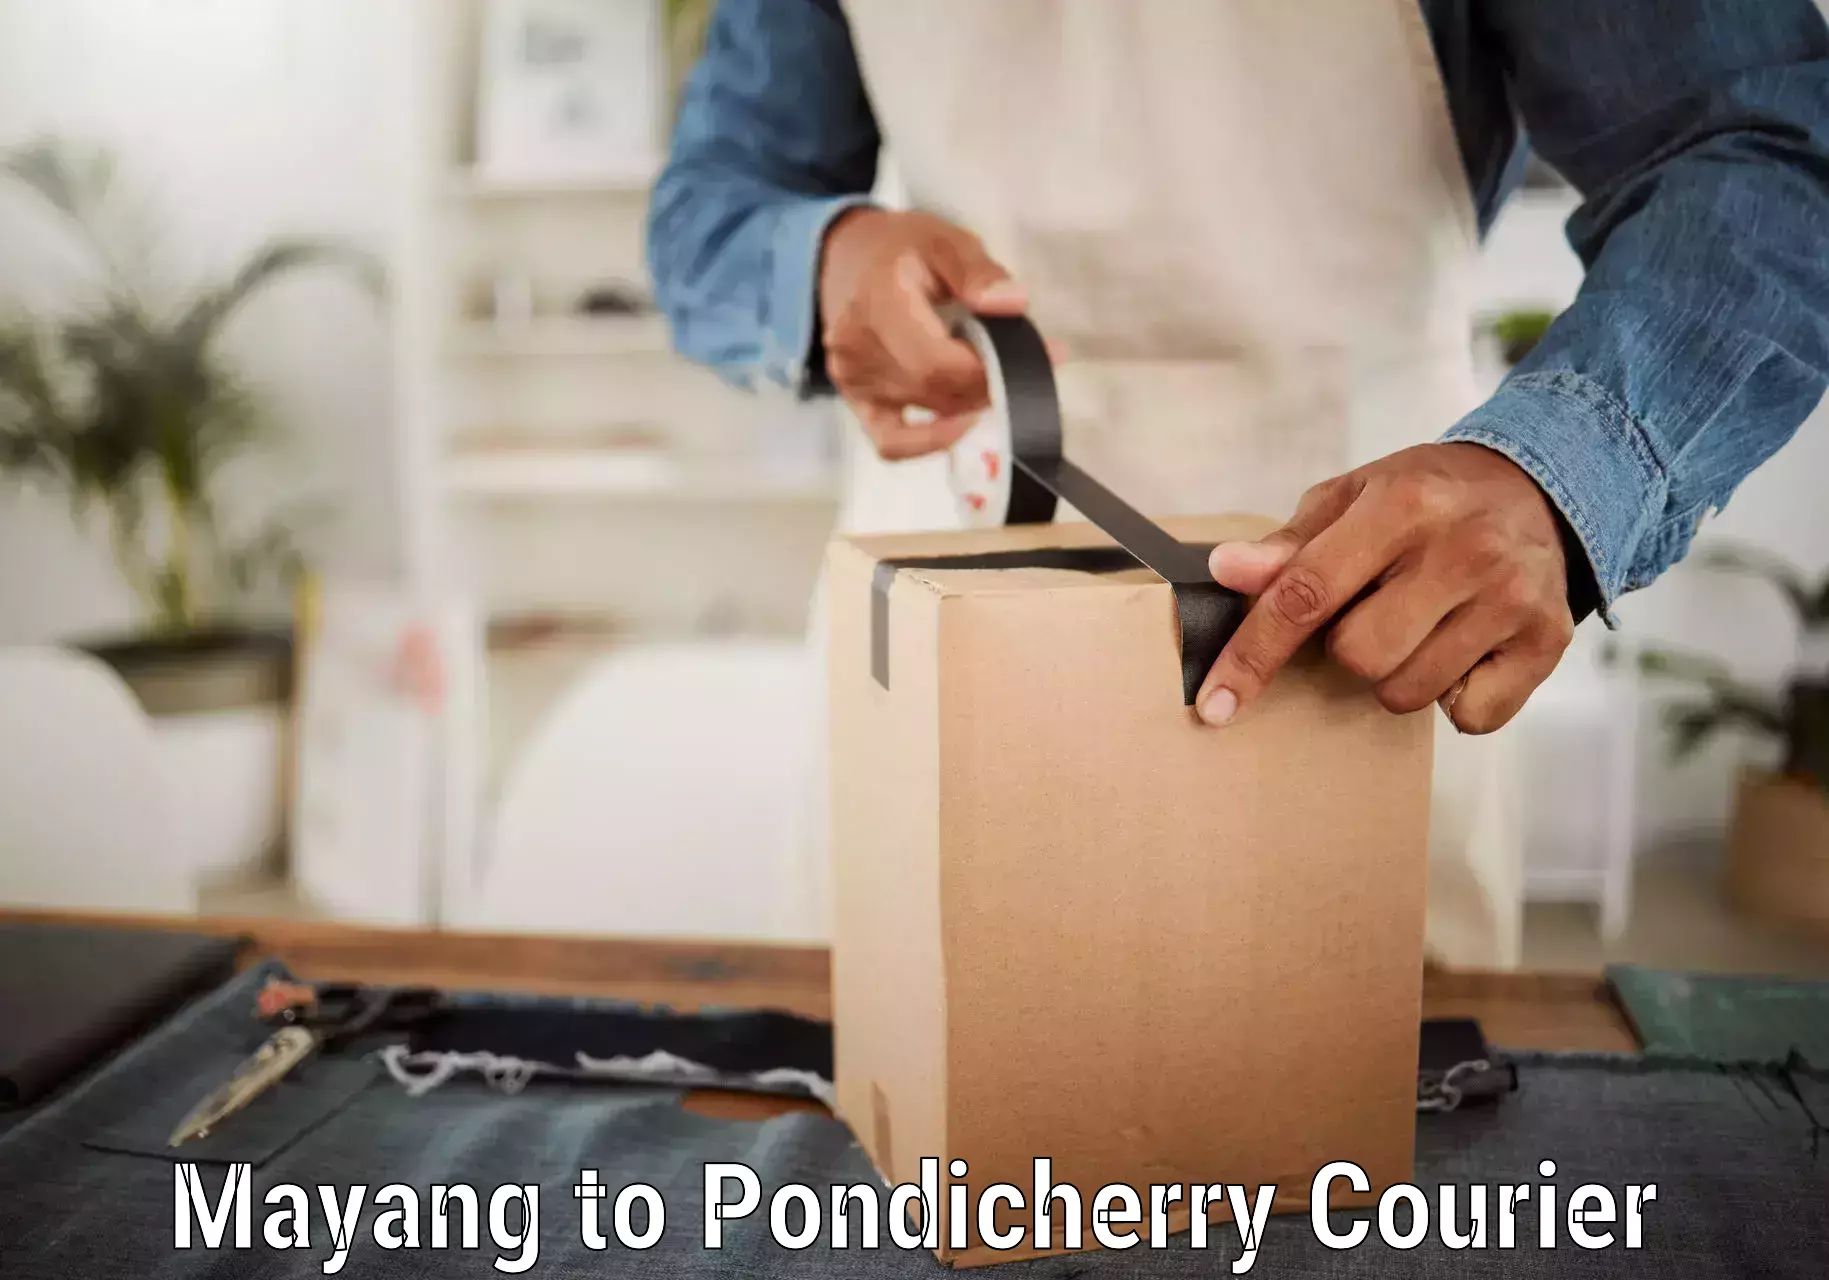 Customer-focused courier Mayang to Pondicherry